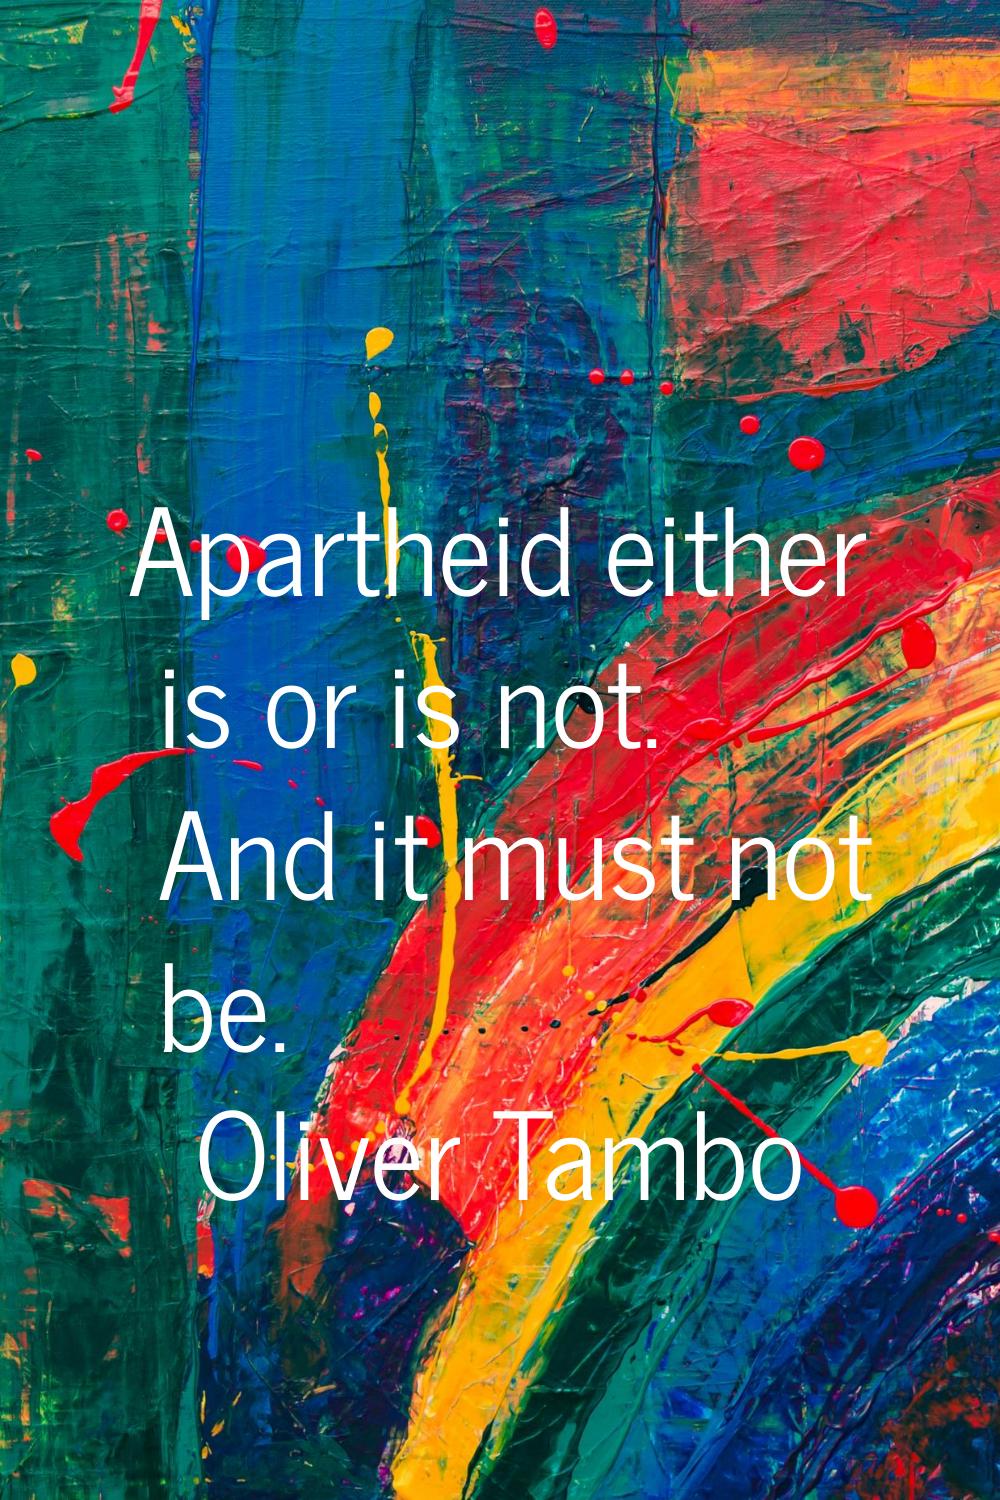 Apartheid either is or is not. And it must not be.